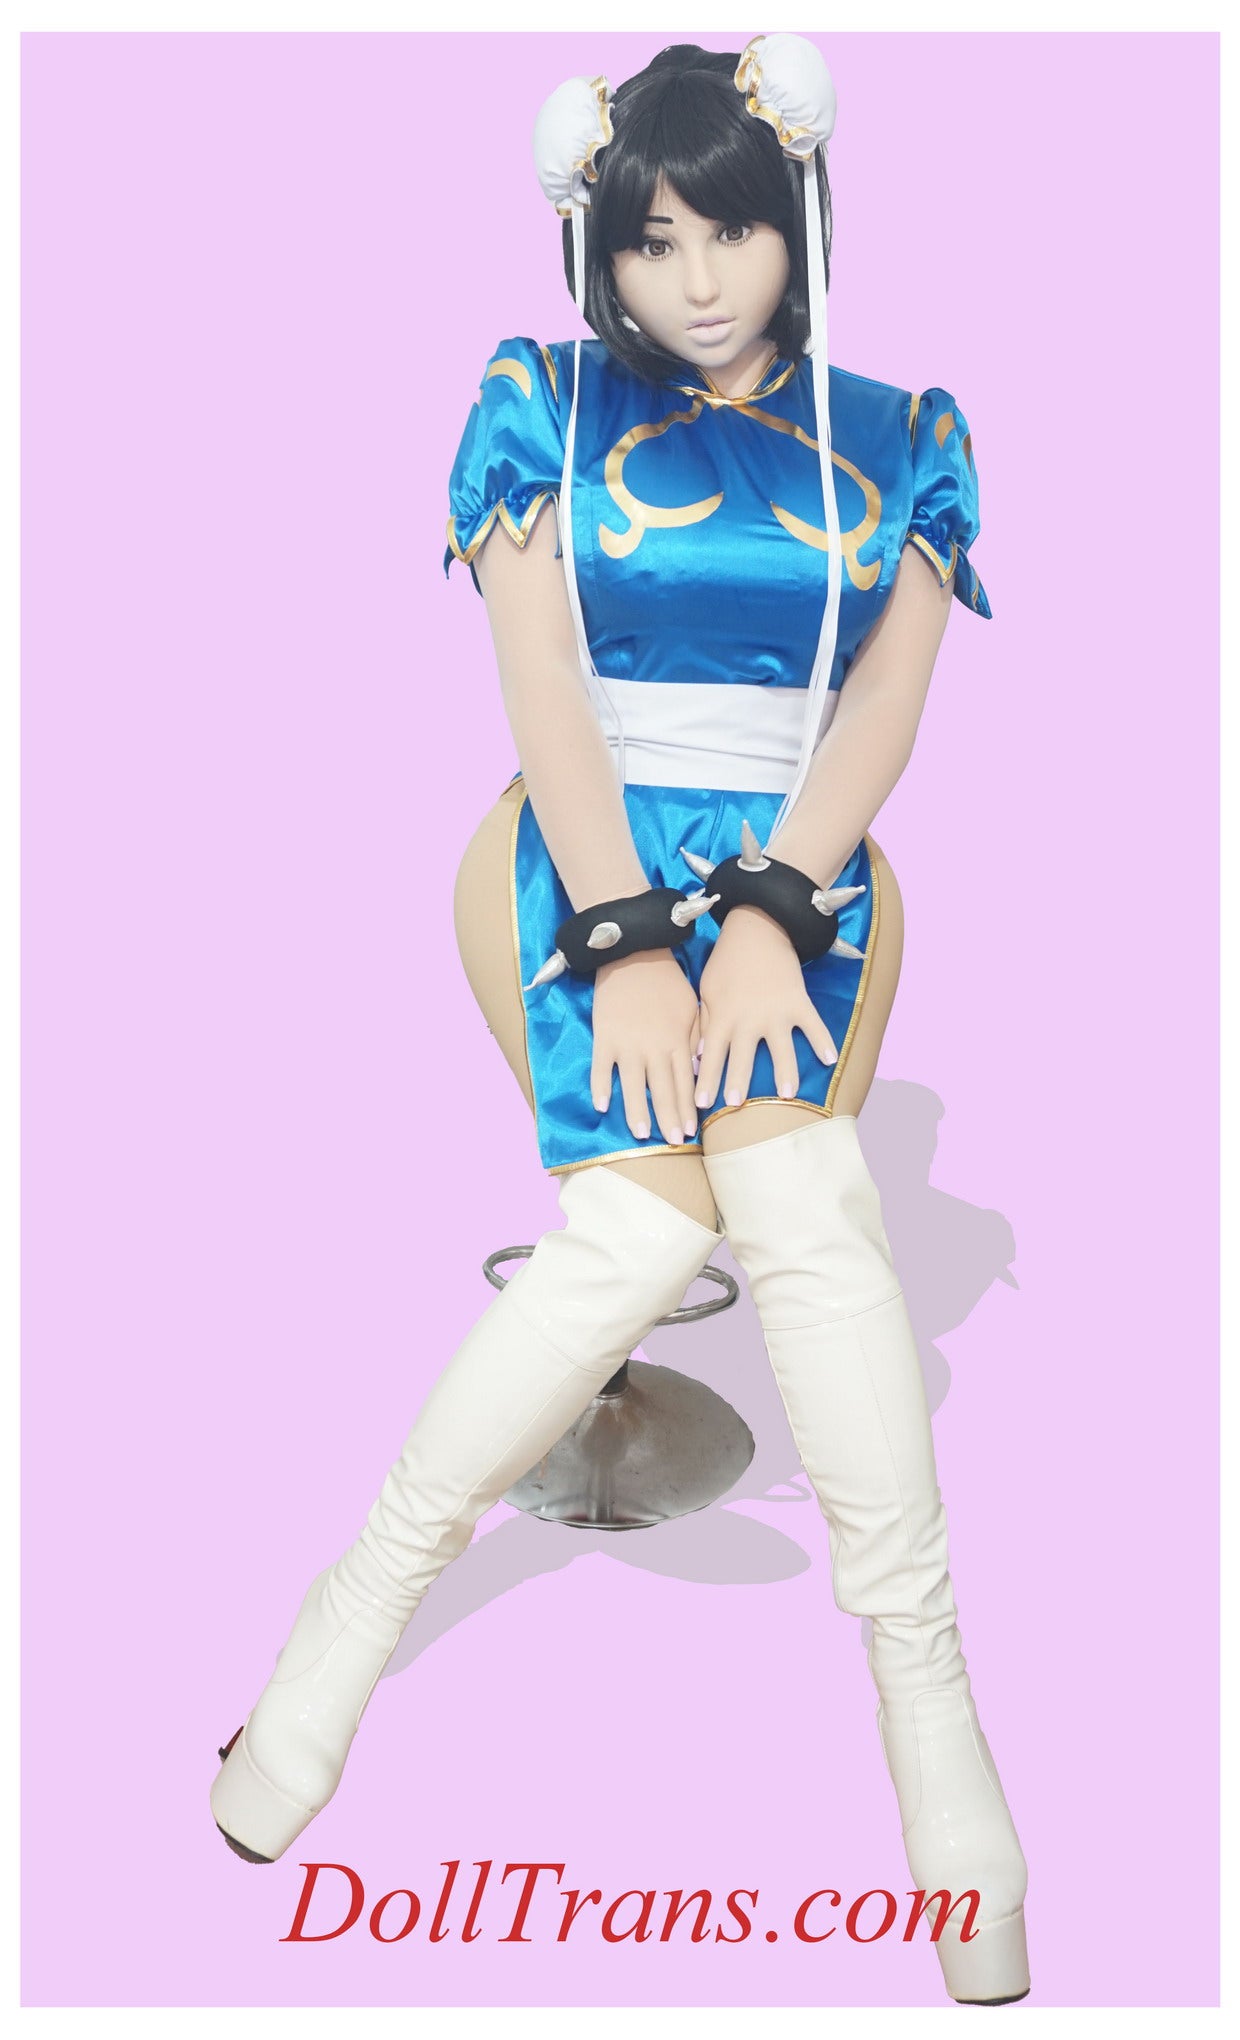 Lovely Chun-Li cosplay with jiggling F-cup boobs style